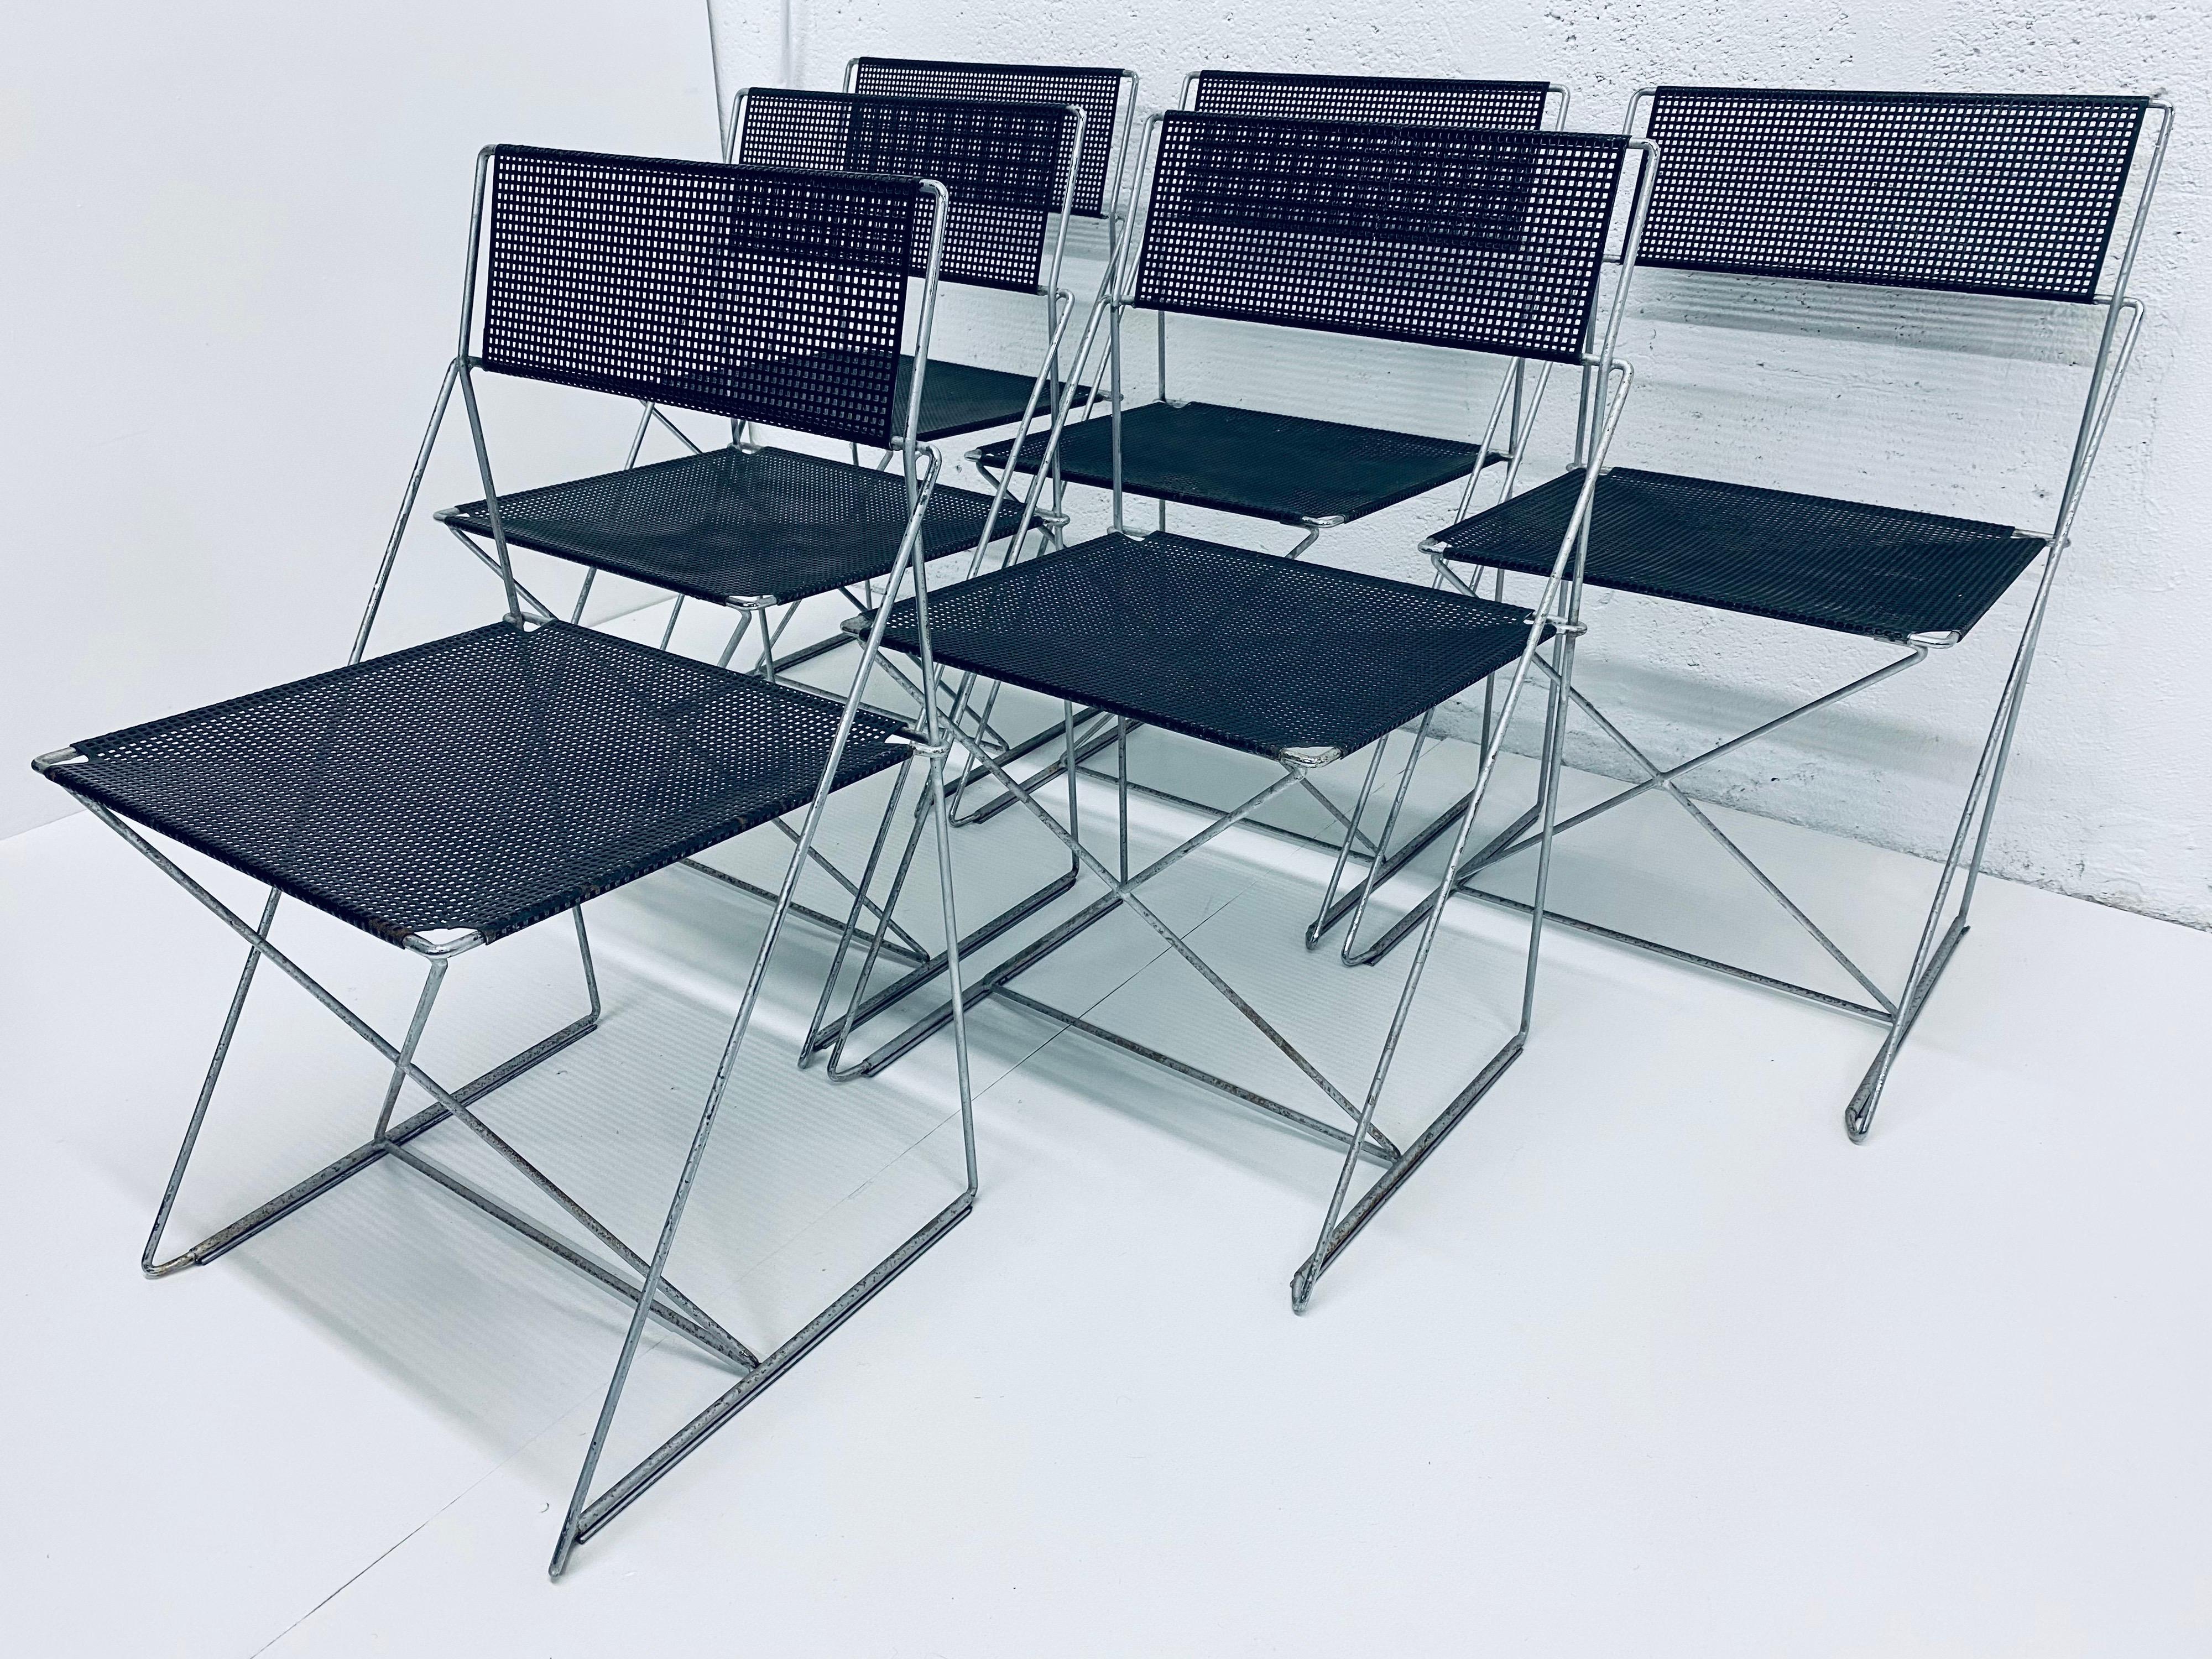 Set of 6 dining chairs in X-line, made of steel rods and black enameled perforated steel backs and seats. Designed by Niels Jorgen Haugesen for Magis. These chairs are in original condition with wear and are stackable. Made in Denmark.